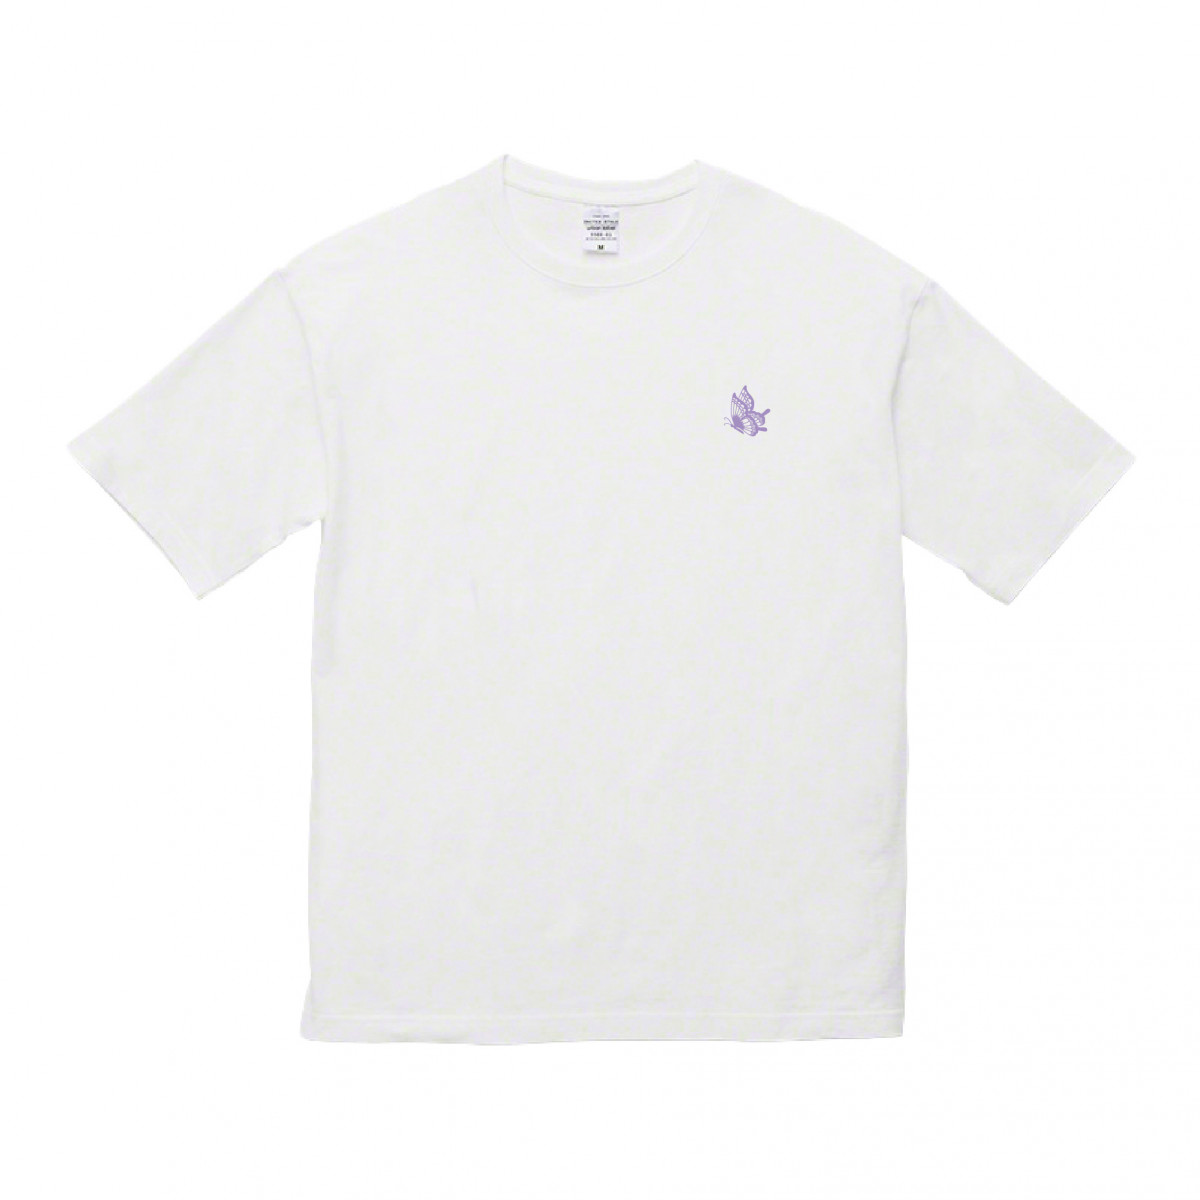 「FLY FLY FLY」 Big T-shirt / White